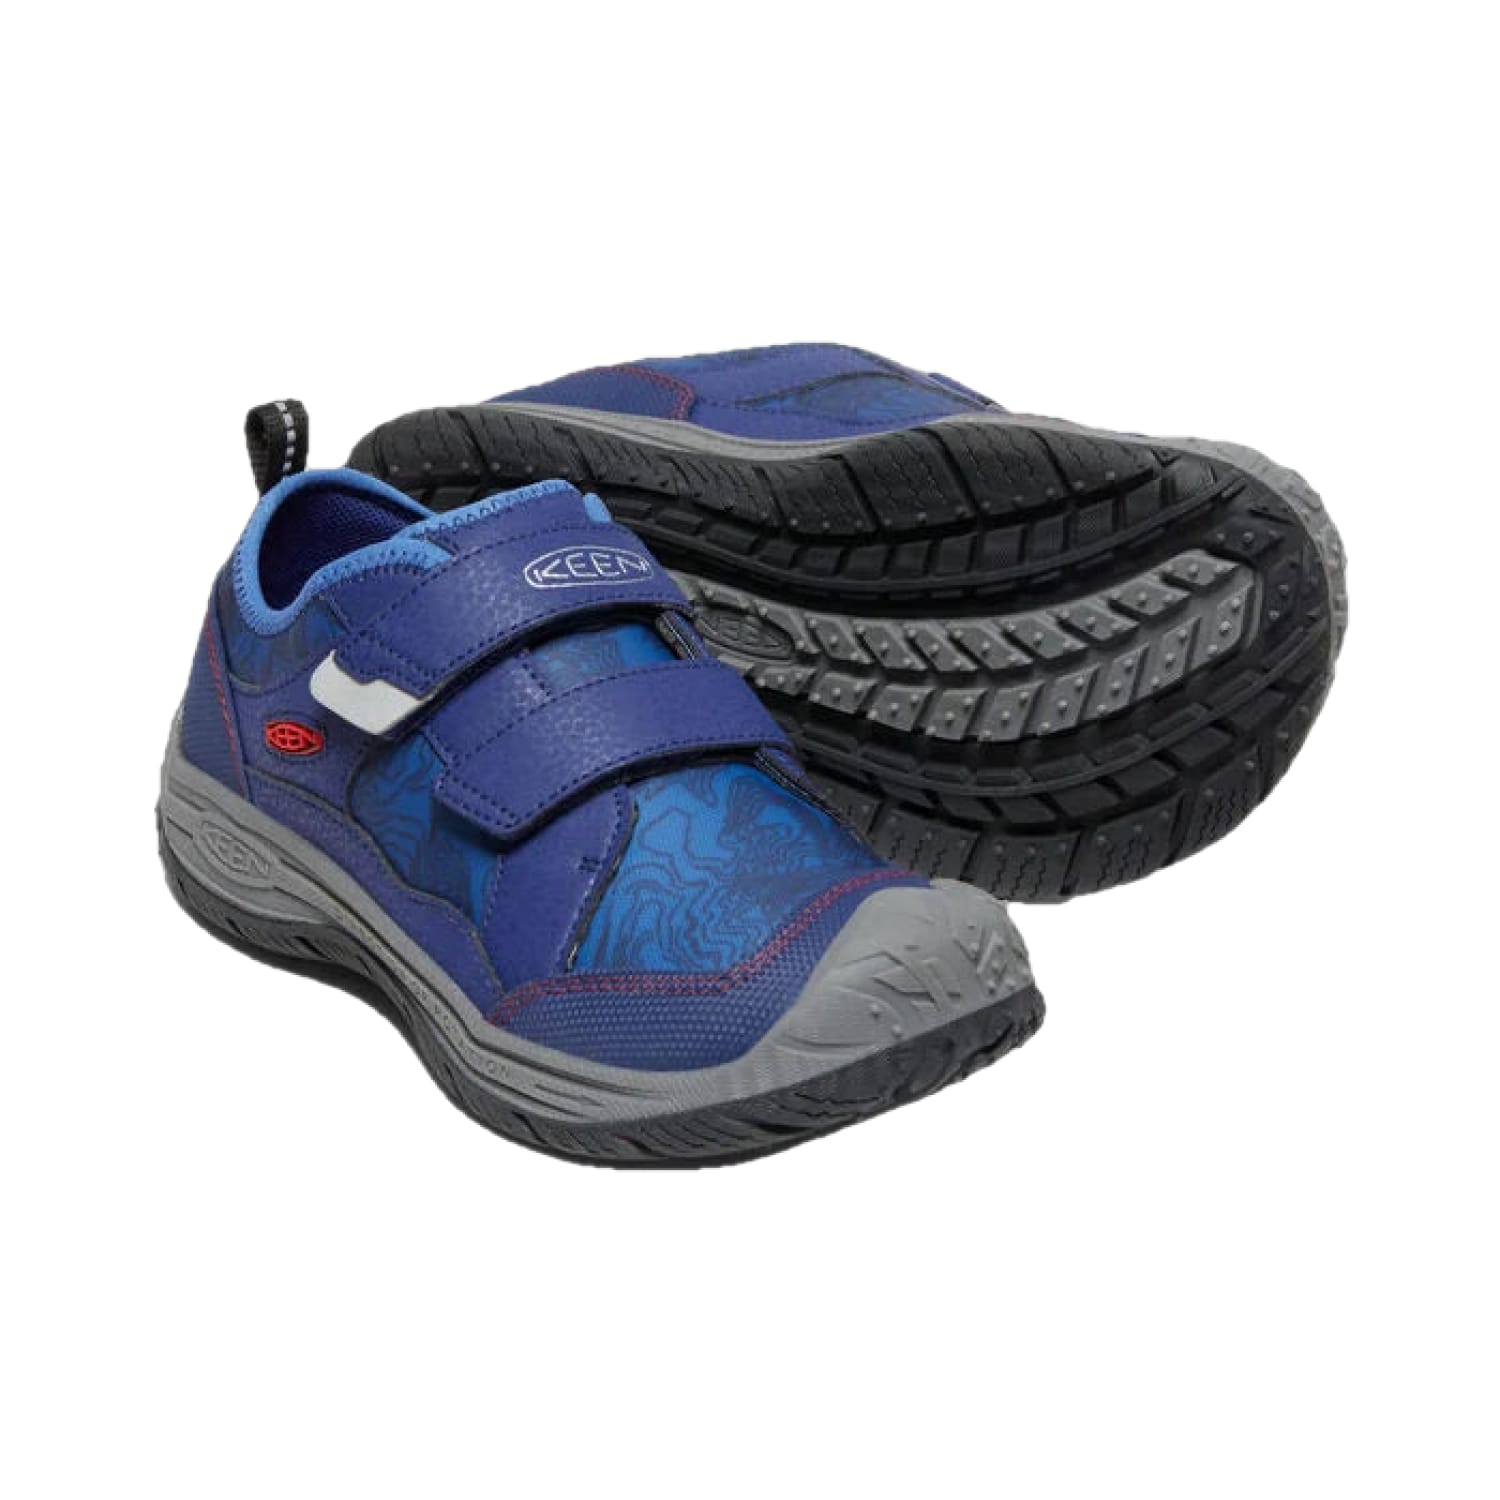 KEEN Speed Hound Slip On Durable Comfortable Easy On